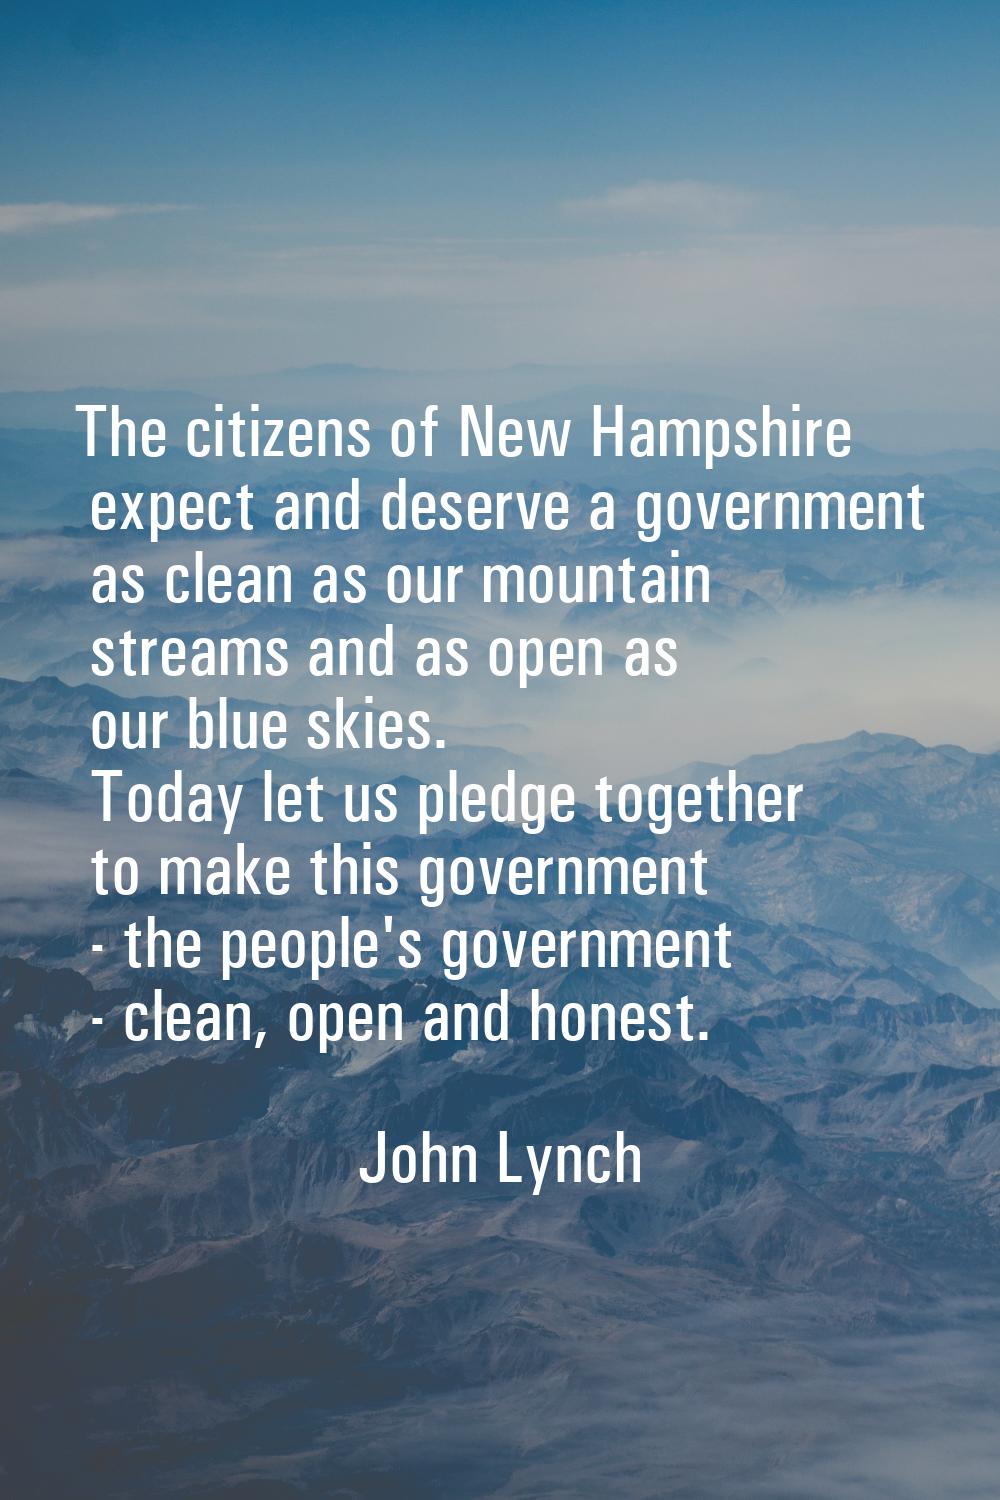 The citizens of New Hampshire expect and deserve a government as clean as our mountain streams and 